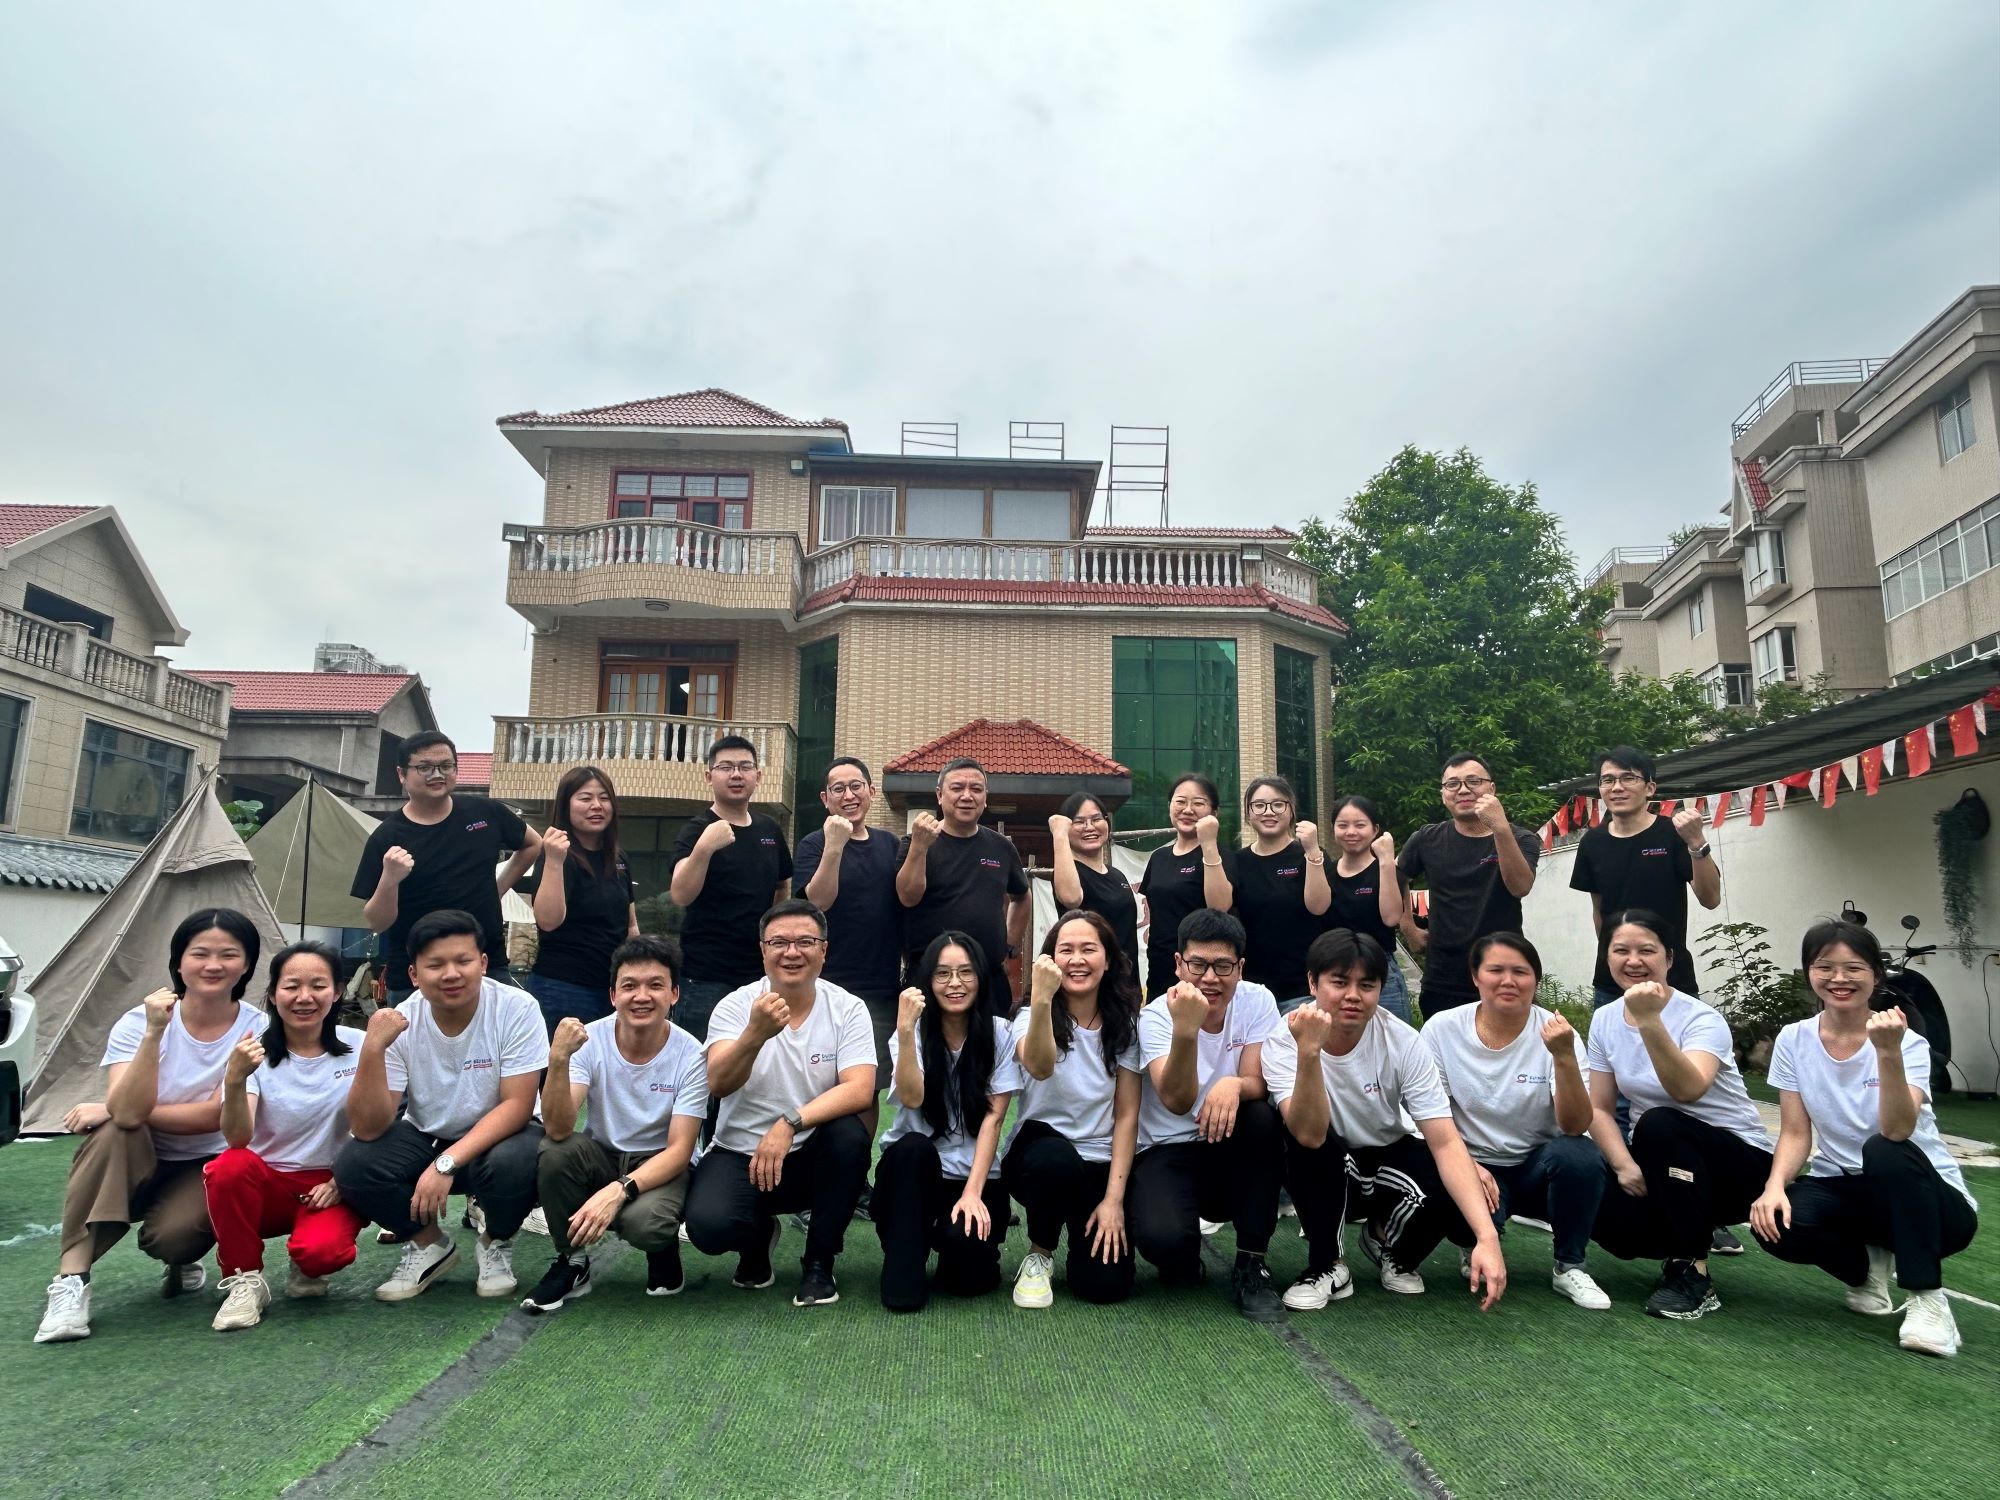 Team Building of SUIHUA on May 9th. A united team can bring out the maximum potential of each member and make the entire team more effective. We always believe that the power of unity can overcome most difficulties.